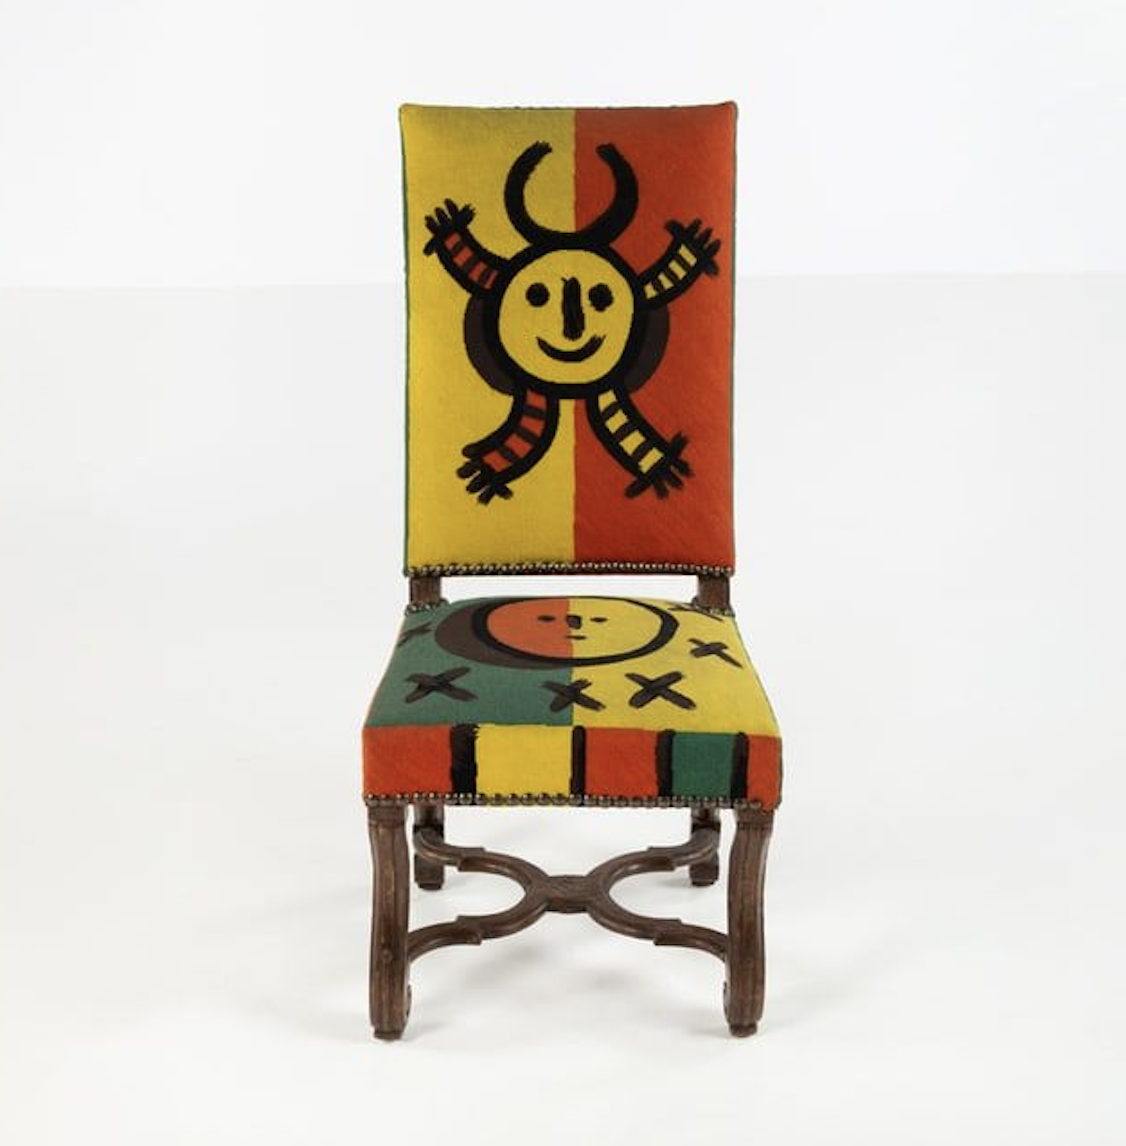 Chairs embroidered with Picasso custom art commanded $228K at Piasa